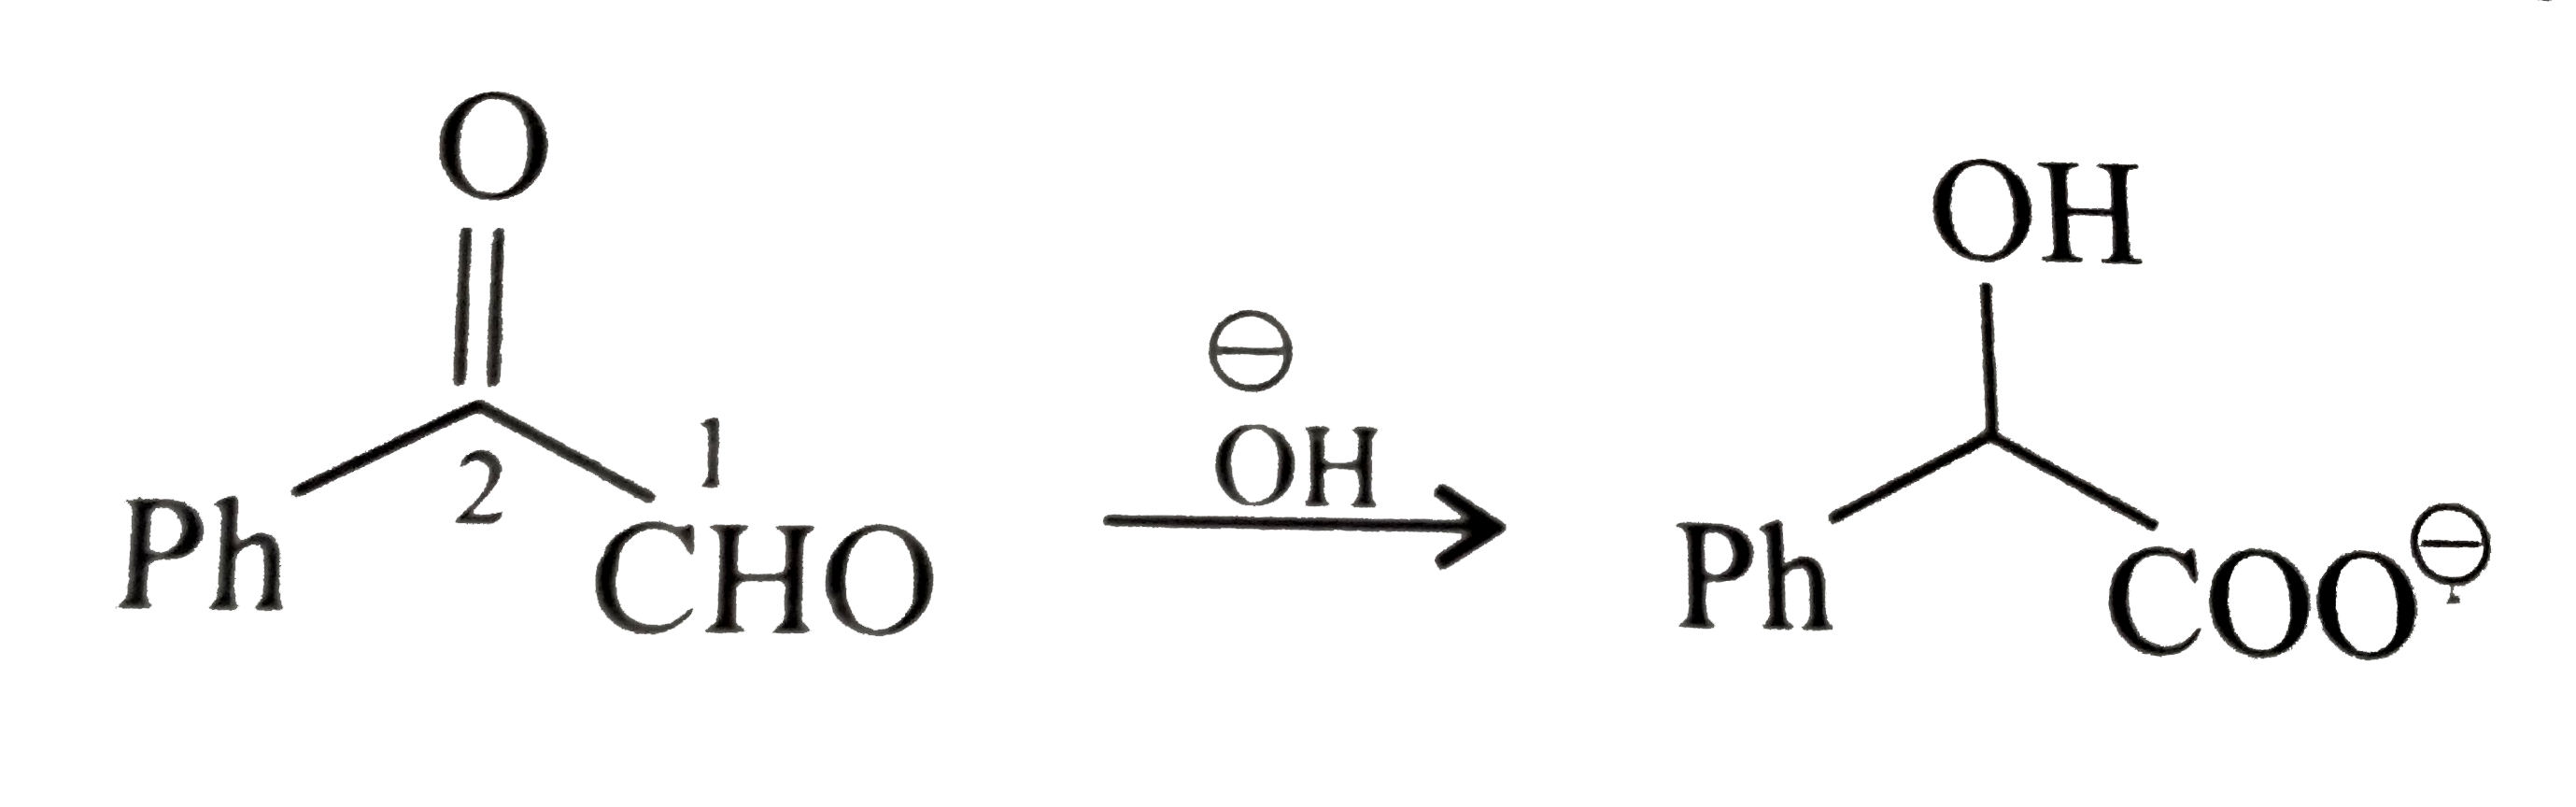 Which of the statements are correct about the internal or intramolecular Cannizzaro reaction given below ?